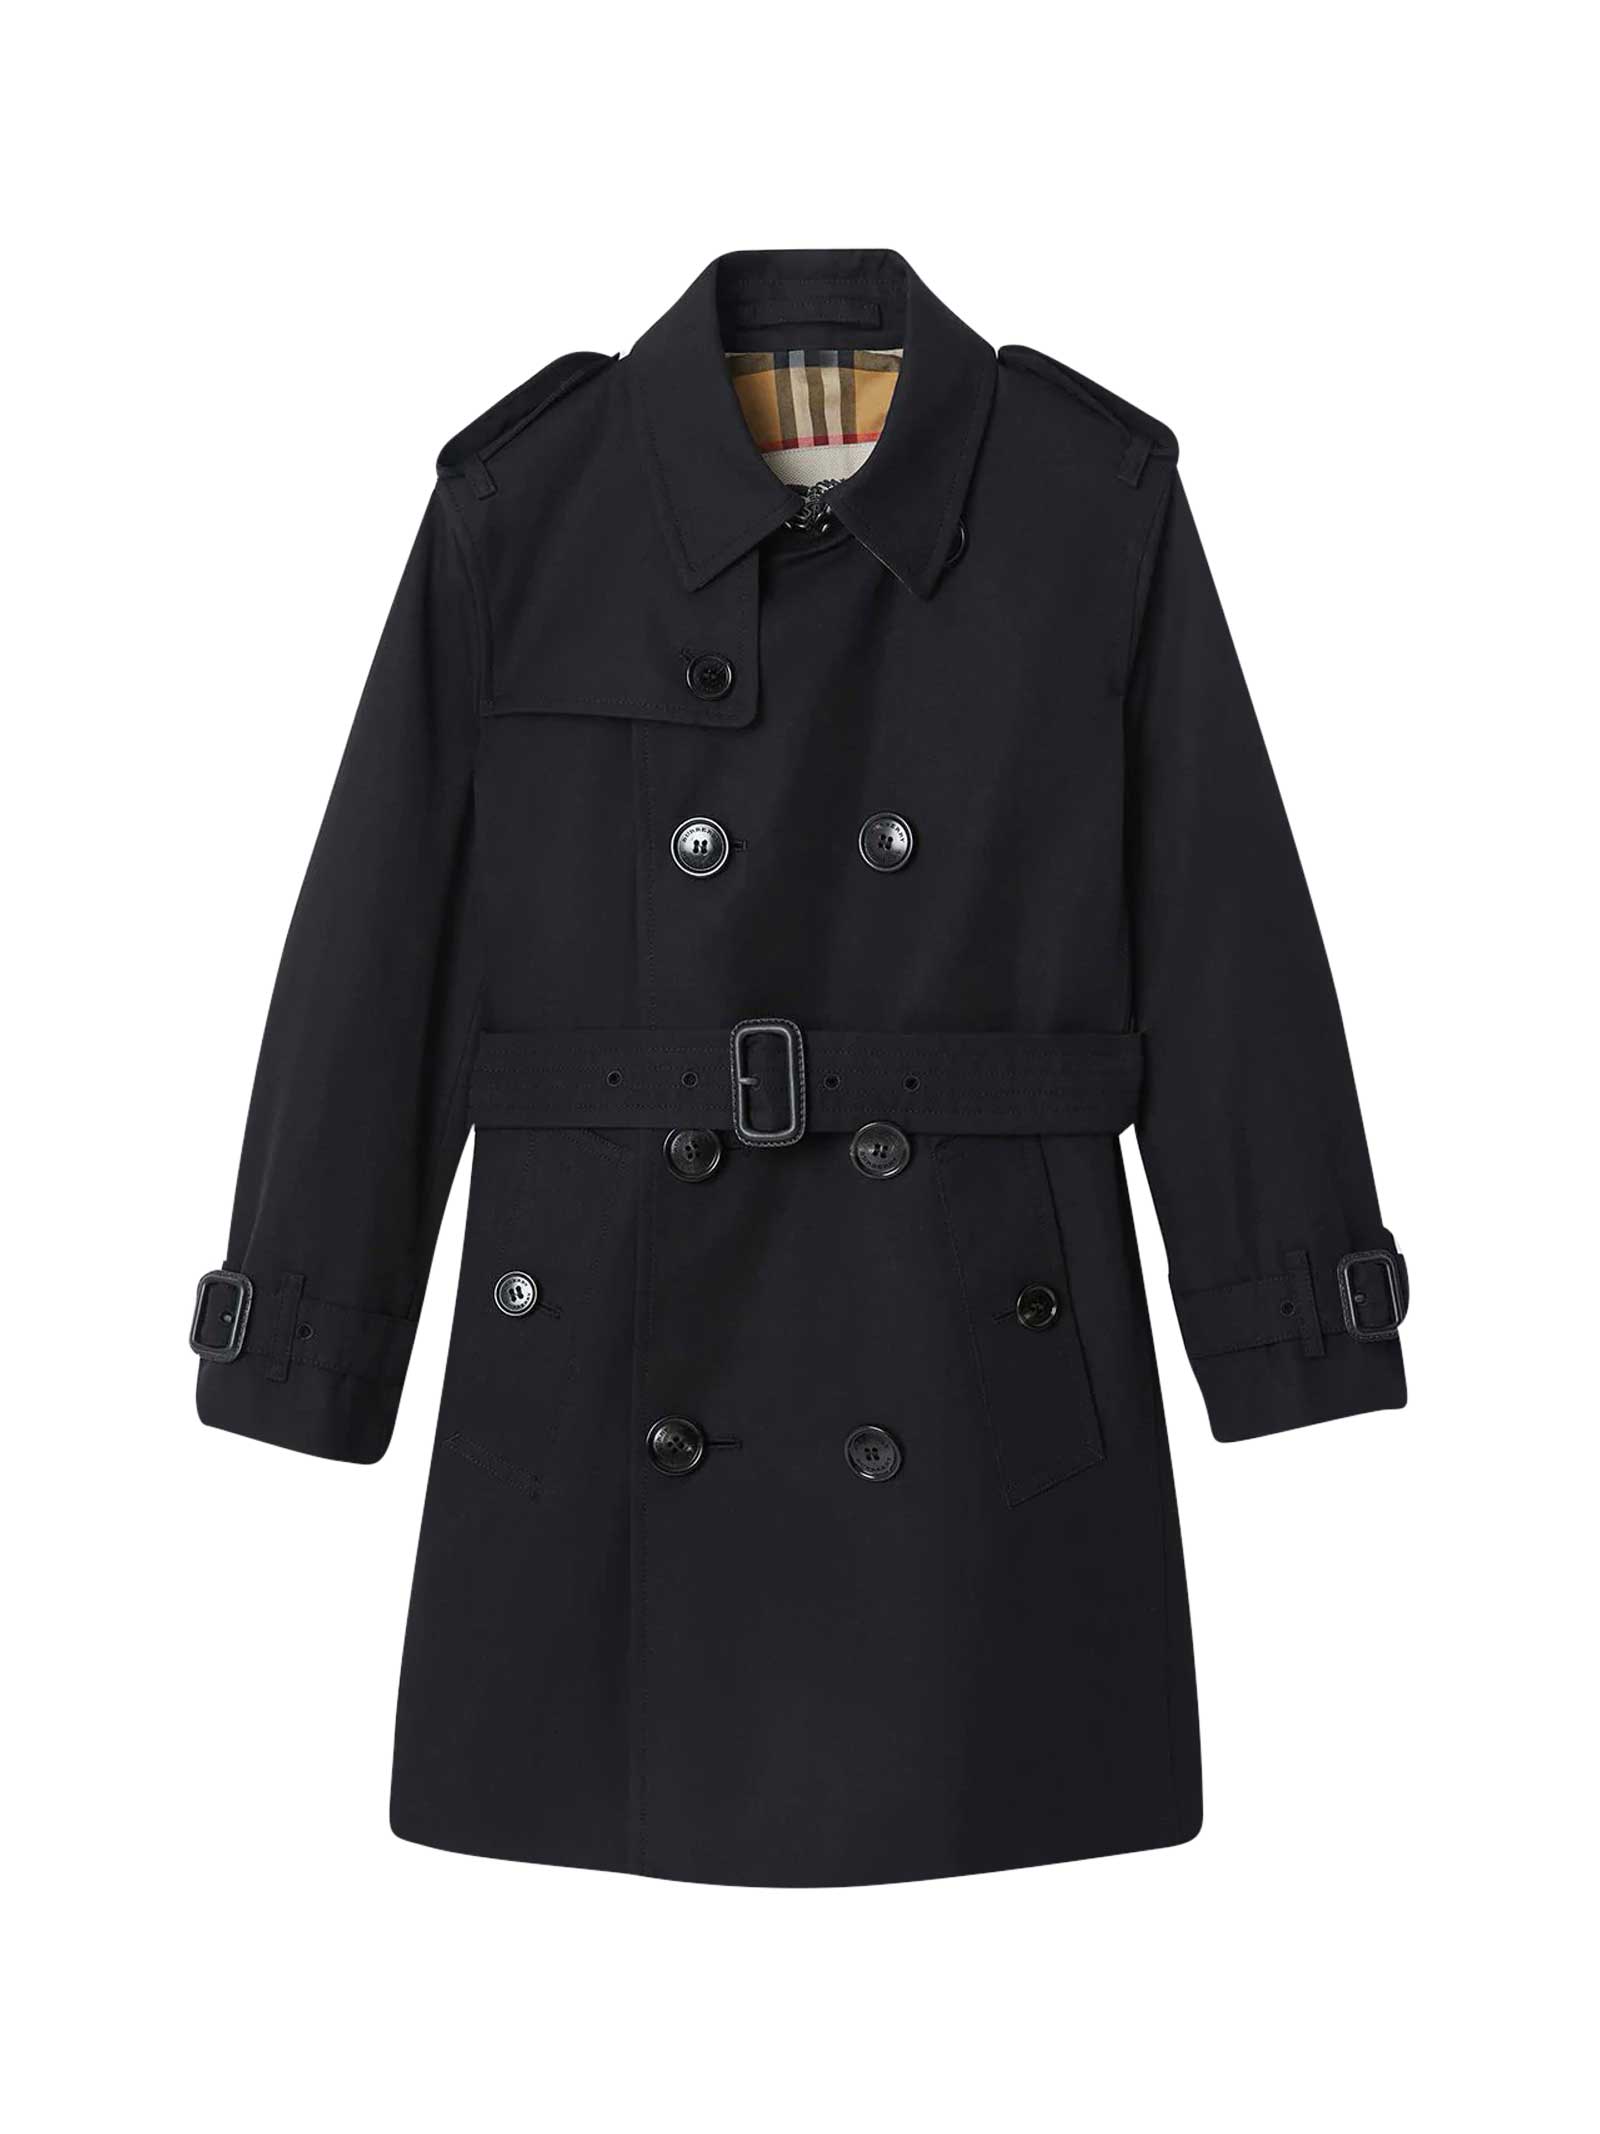 Burberry Black Trench Coat With Belt